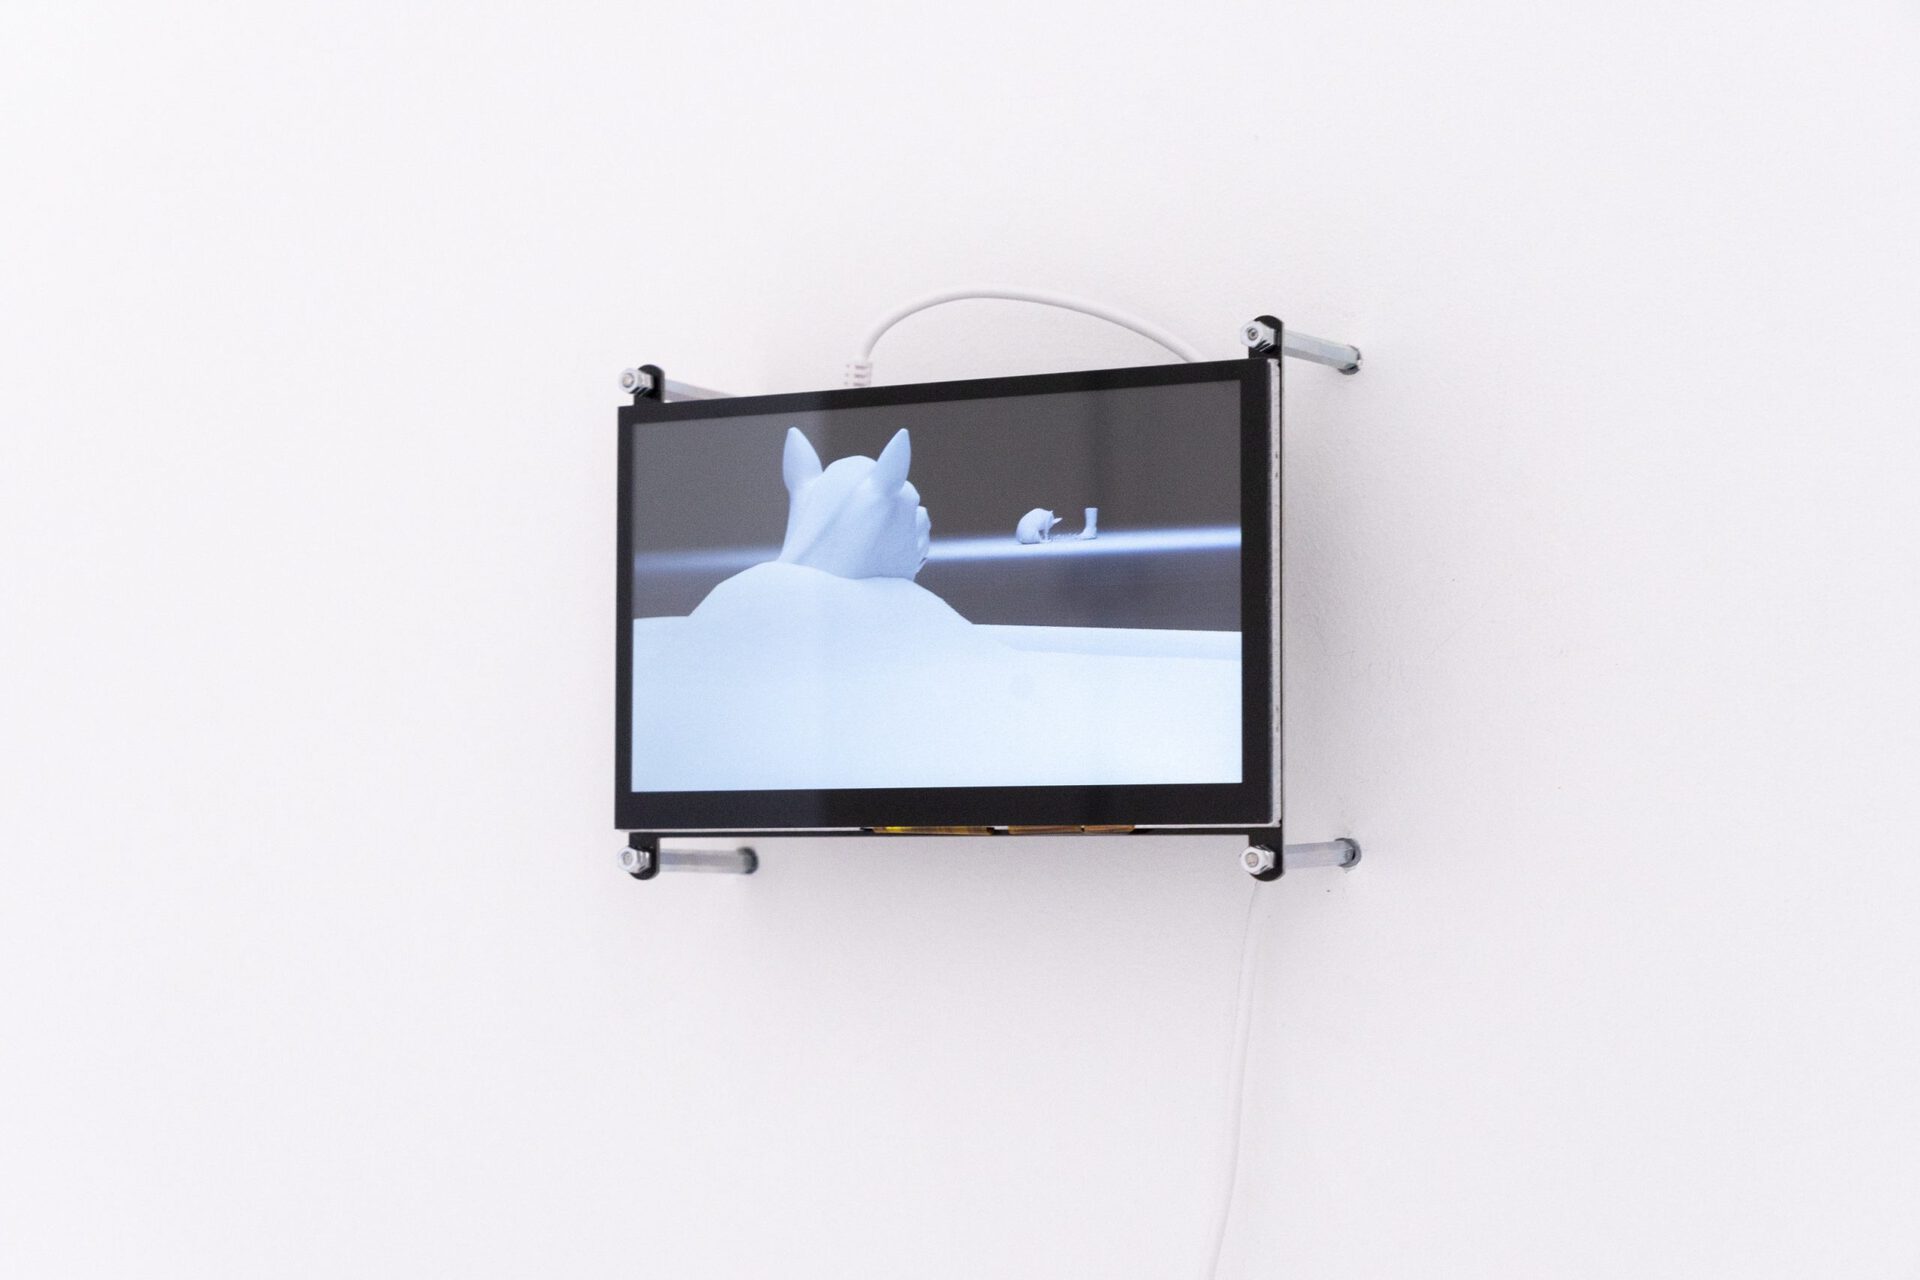 Nassim L'Ghoul, Pig from head to toe, installation view 1, 2022, 3D animation, 16,5 x 10 cm, 02:25 min, sound: Ungemach